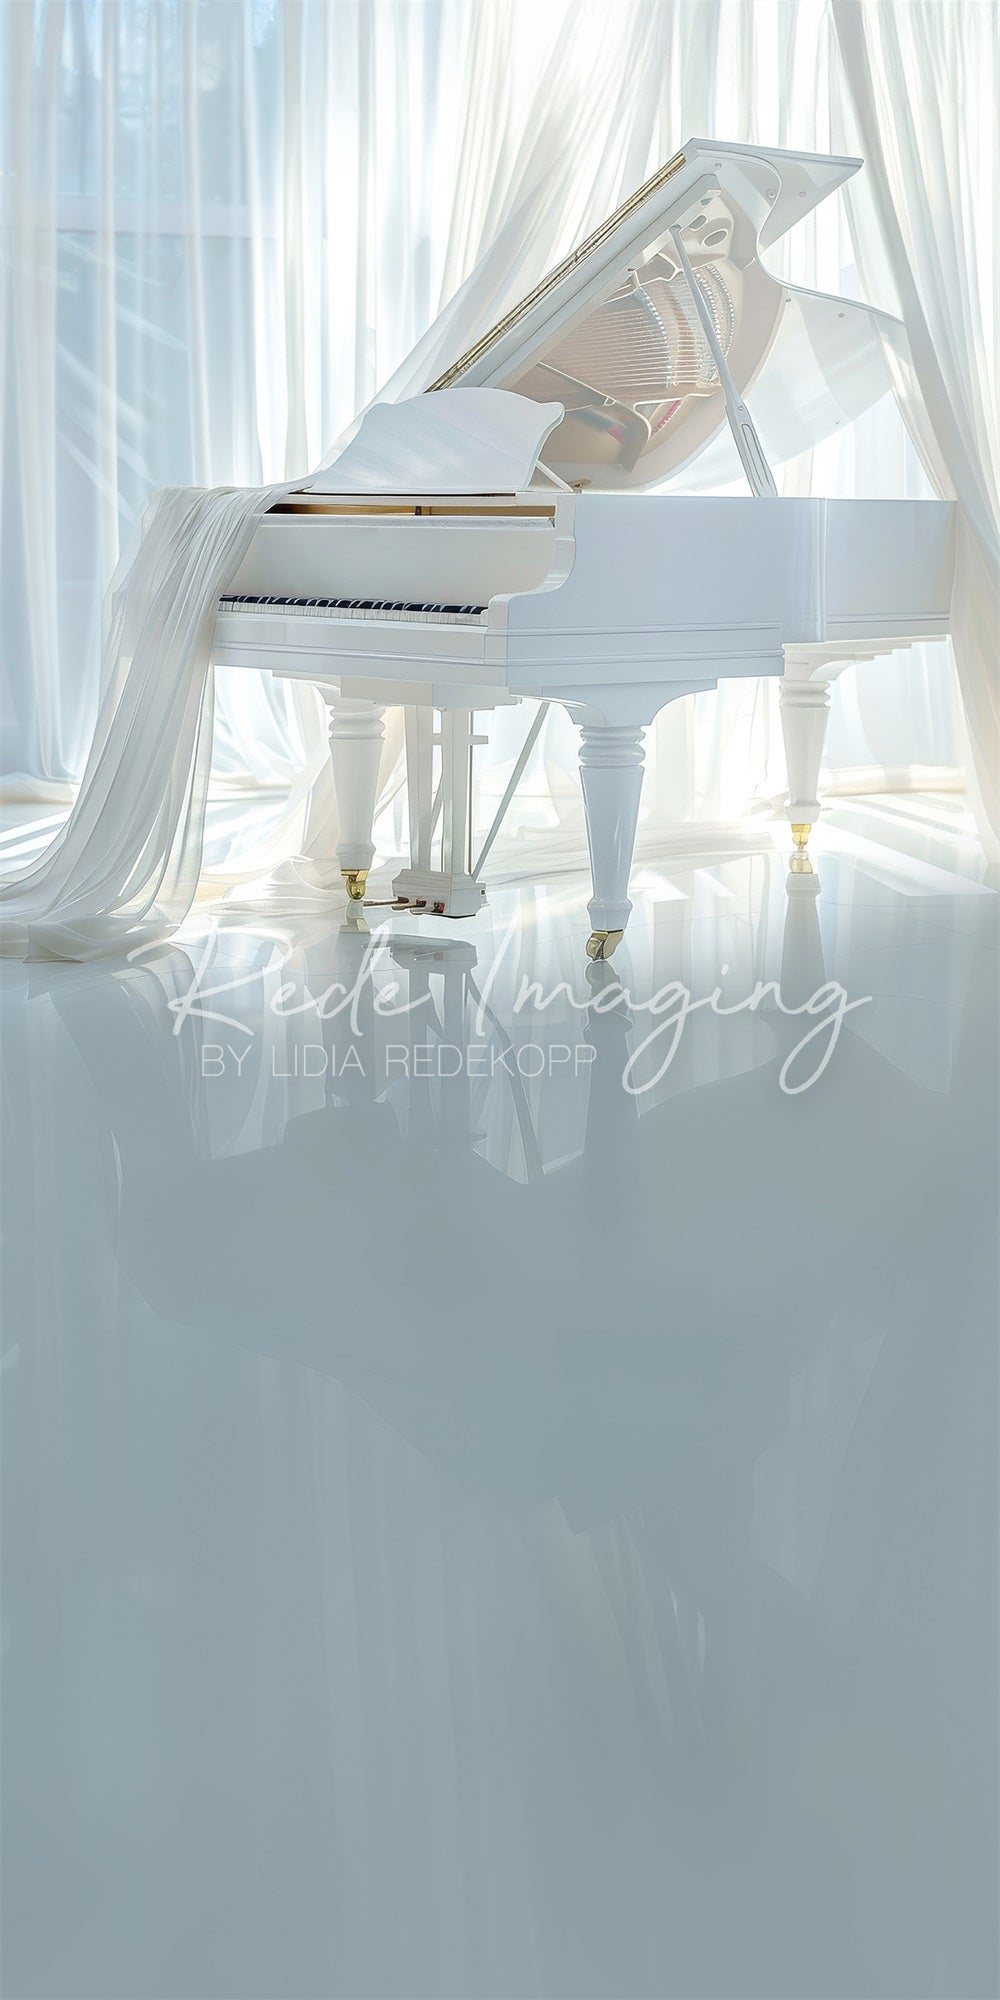 Kate Sweep White Curtain Piano Backdrop Designed by Lidia Redekopp